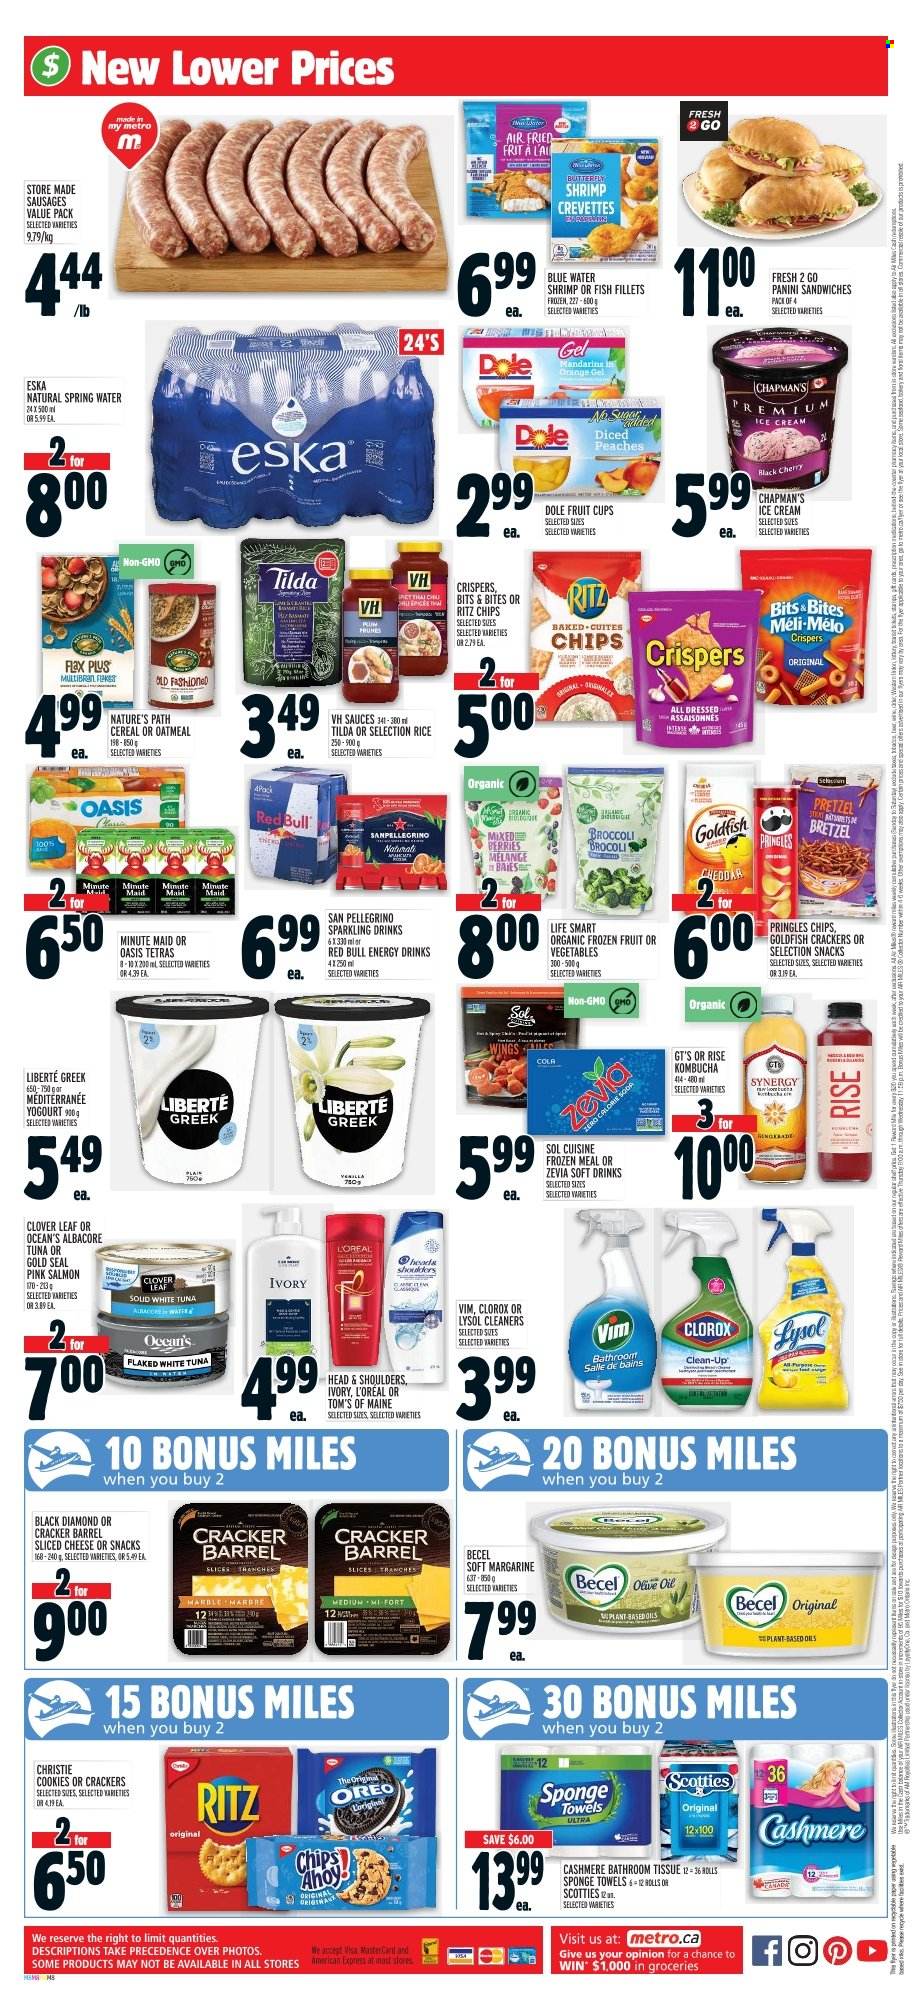 thumbnail - Metro Flyer - March 16, 2023 - March 22, 2023 - Sales products - pretzels, panini, broccoli, Dole, mandarines, fruit cup, oranges, peaches, fish fillets, salmon, tuna, shrimps, sandwich, sausage, sliced cheese, Clover, margarine, ice cream, organic frozen fruit, cookies, crackers, RITZ, Pringles, Goldfish, oatmeal, cereals, rice, olive oil, prunes, dried fruit, energy drink, Red Bull, fruit punch, spring water, San Pellegrino, water, kombucha, Sol, bath tissue, Lysol, Clorox, L’Oréal, Head & Shoulders, sponge, towel, pet bed, Oreo. Page 2.